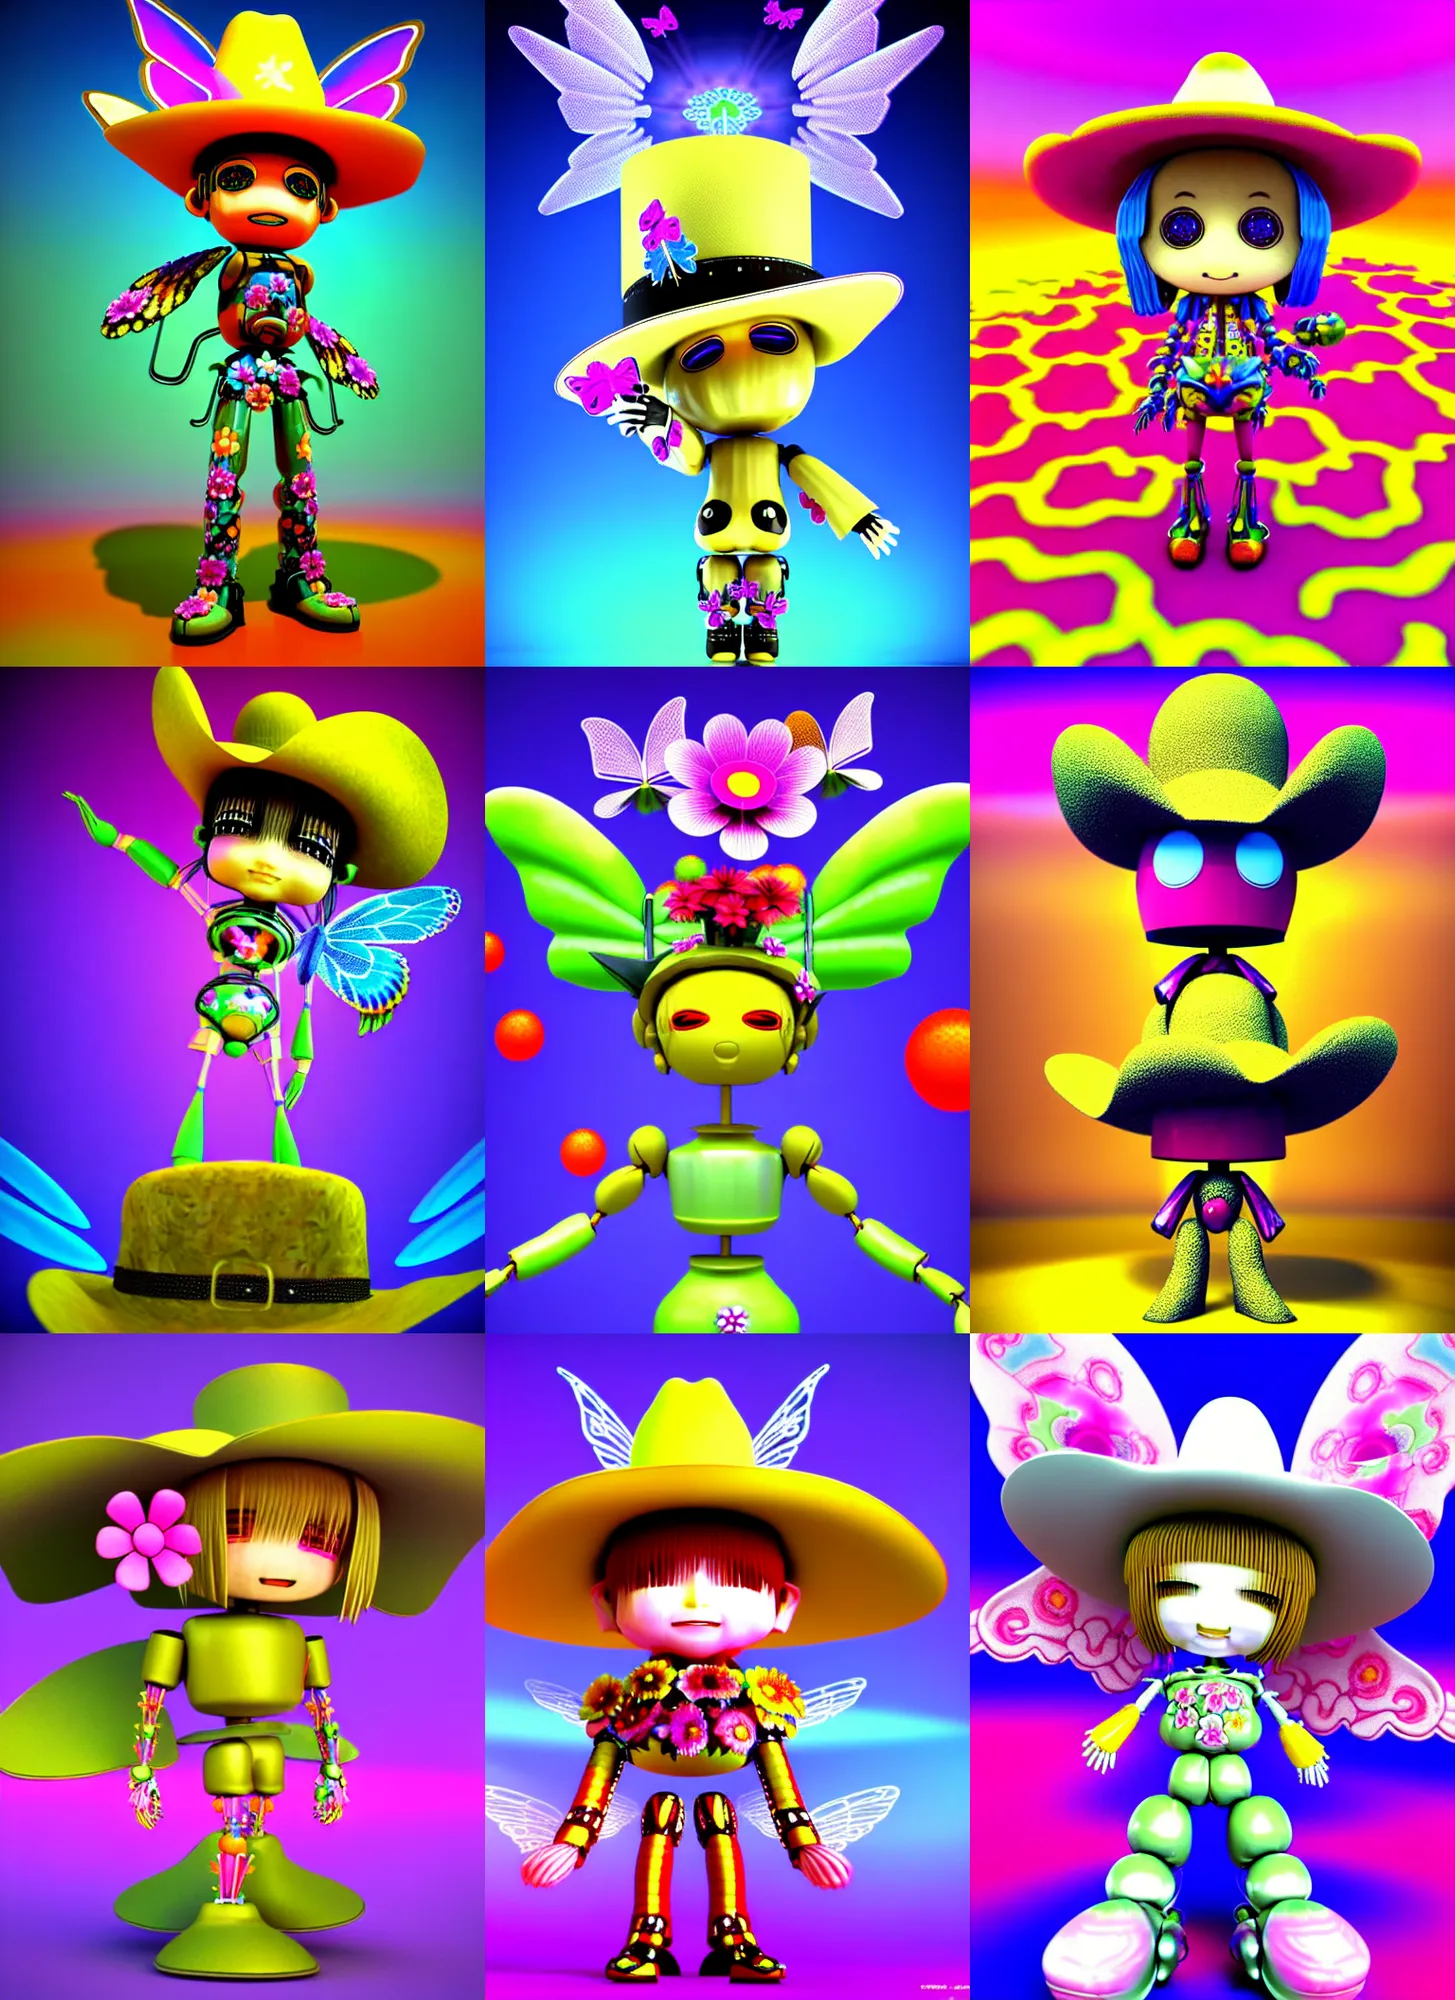 Prompt: 3d render of chibi flower robot by Ichiro Tanida wearing a big cowboy hat and wearing angel wings against a psychedelic swirly background with 3d butterflies and 3d flowers n the style of 1990's CG graphics 3d rendered y2K aesthetic by Ichiro Tanida, 3DO magazine